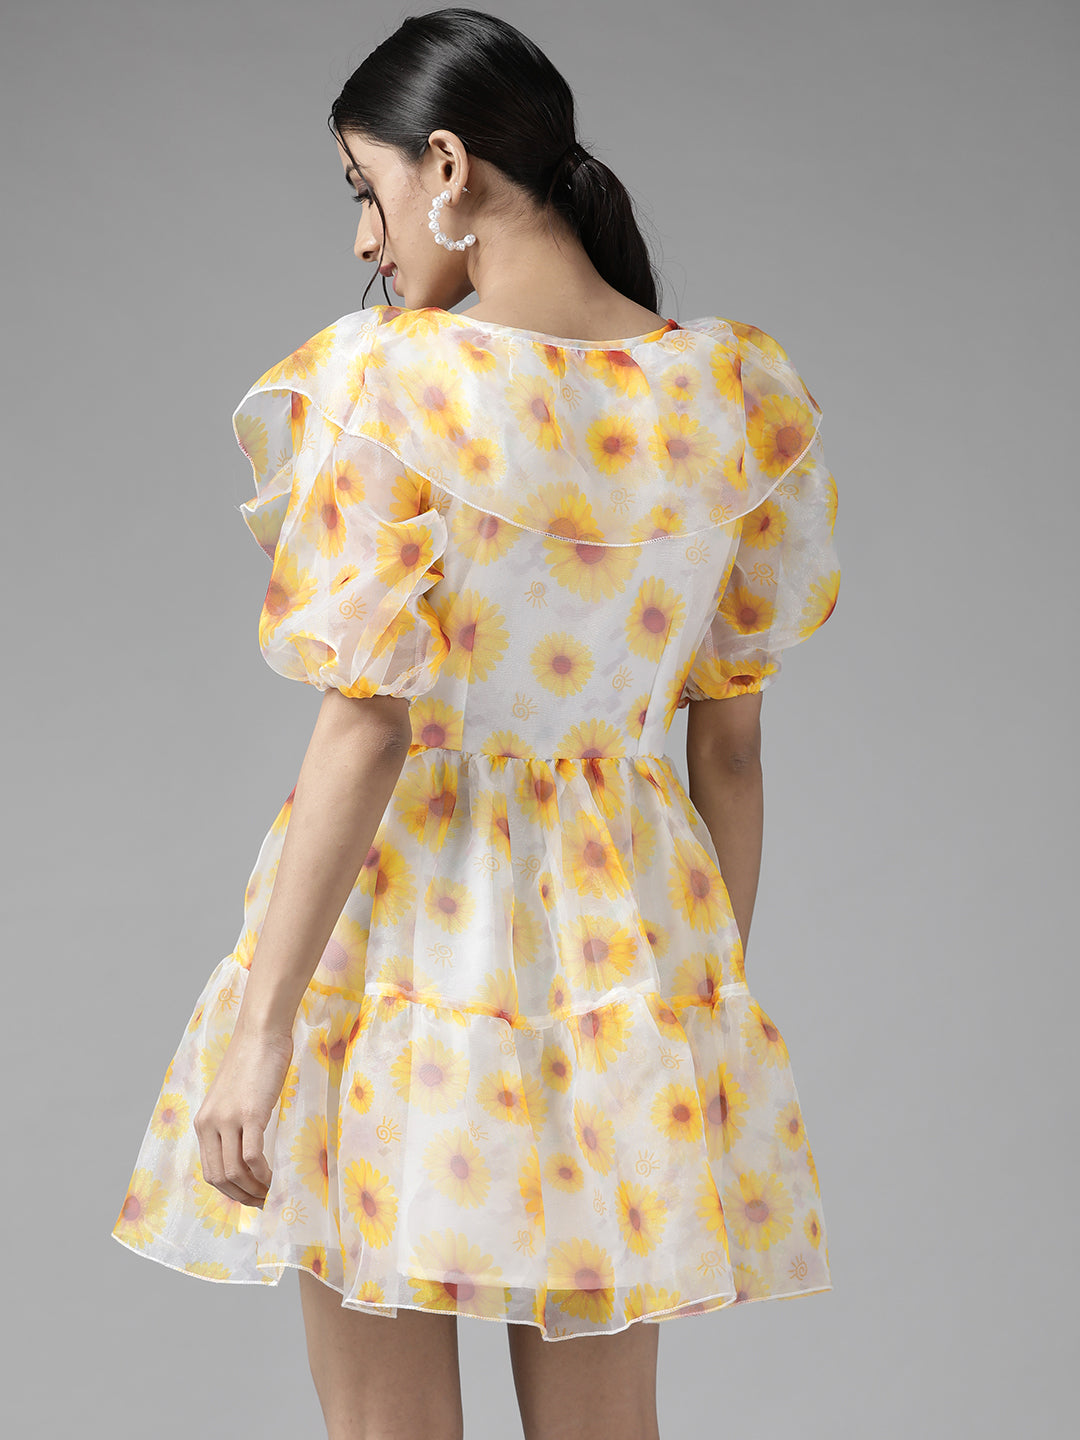 PANIT Cream-Coloured Floral Fit And Flare Dress